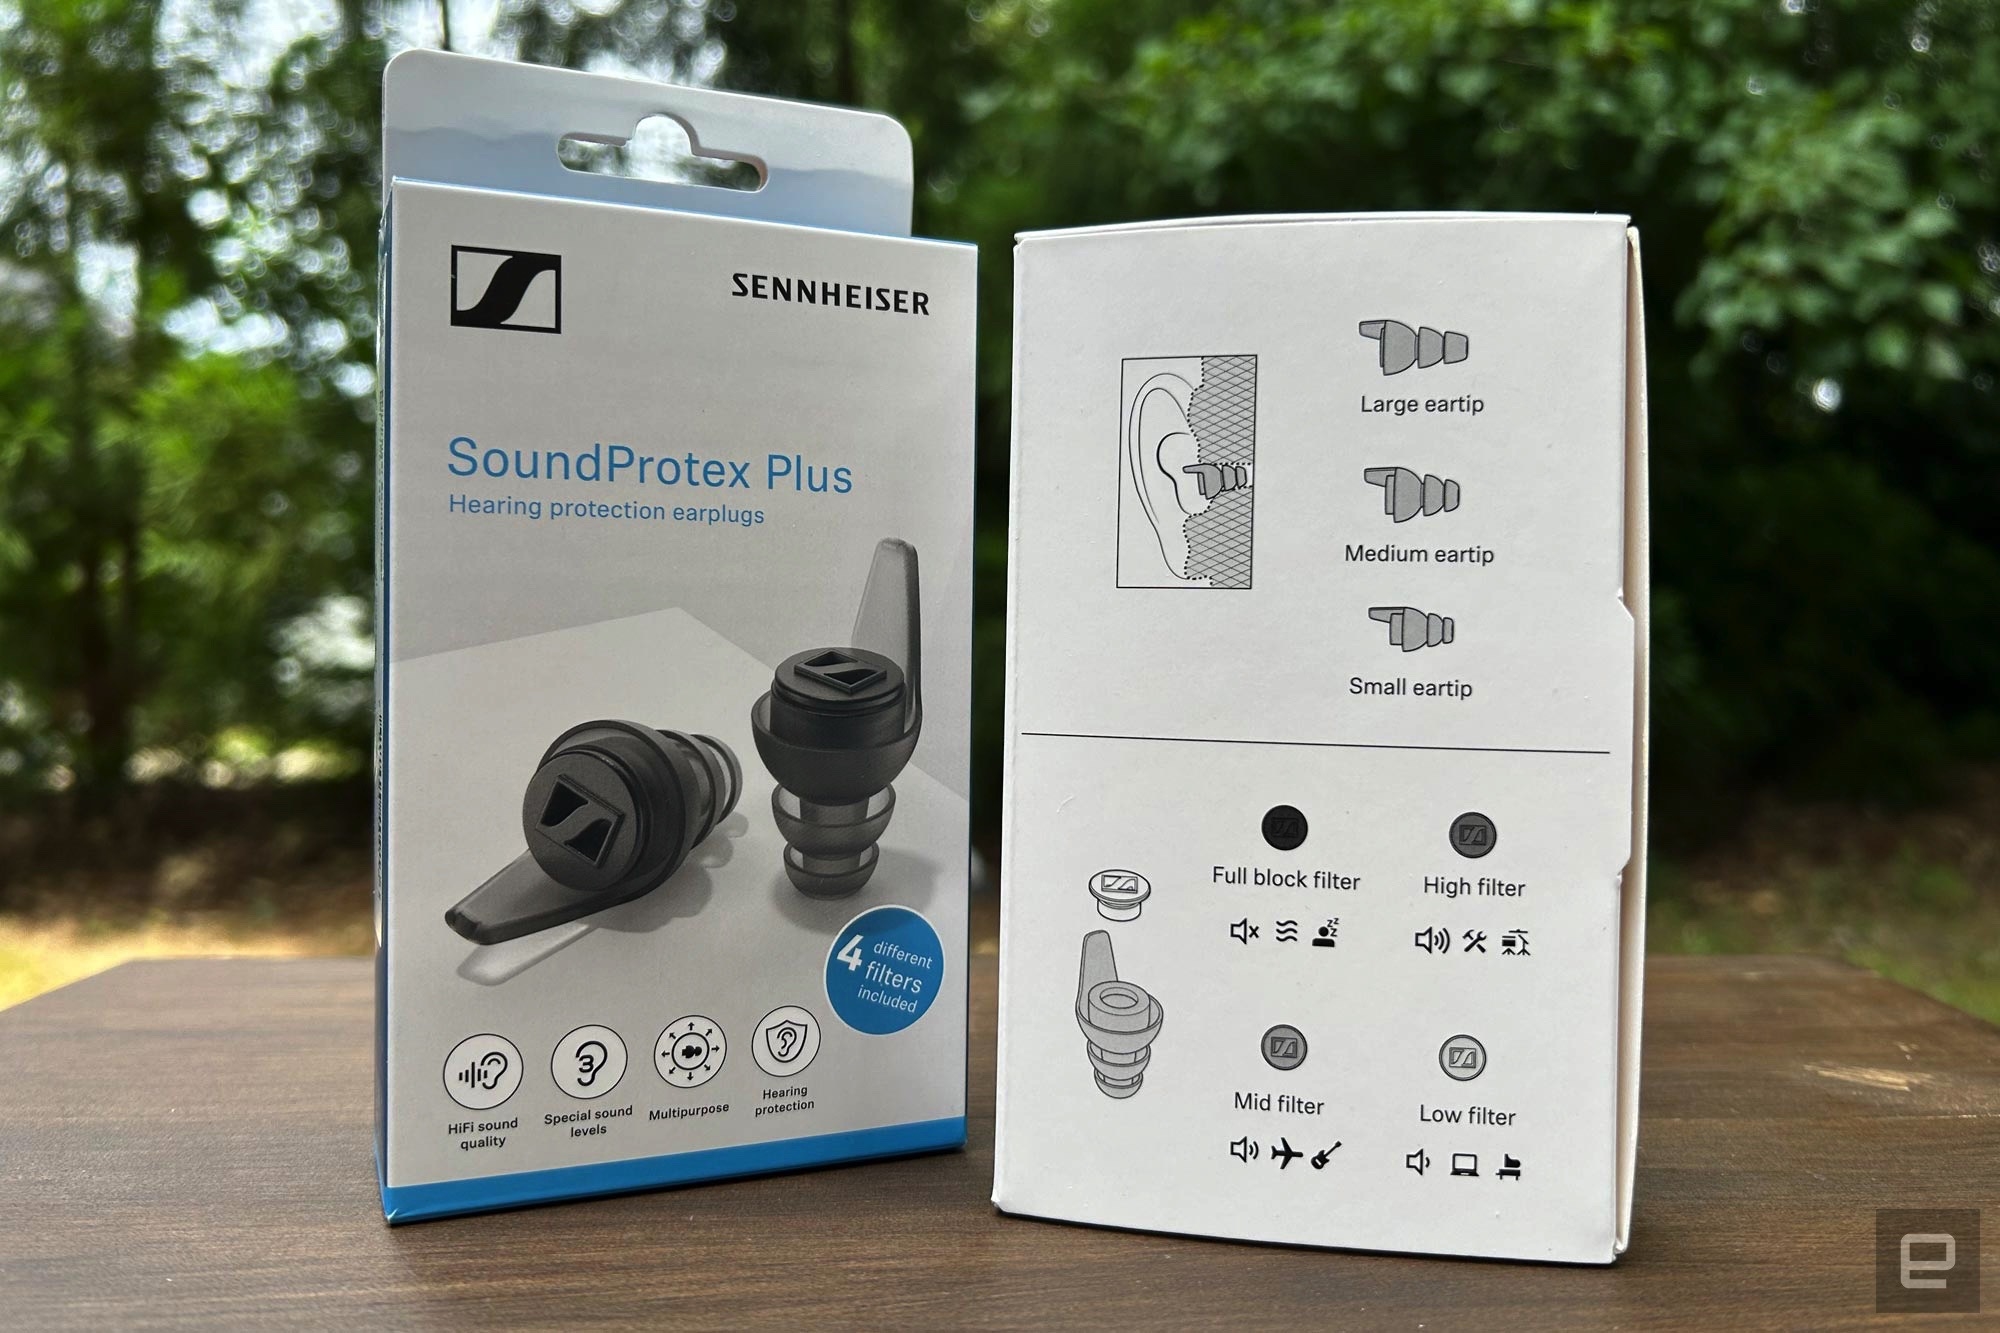 Sennheiser SoundProtex Plus review: Concert earplugs that don't kill the vibe | DeviceDaily.com